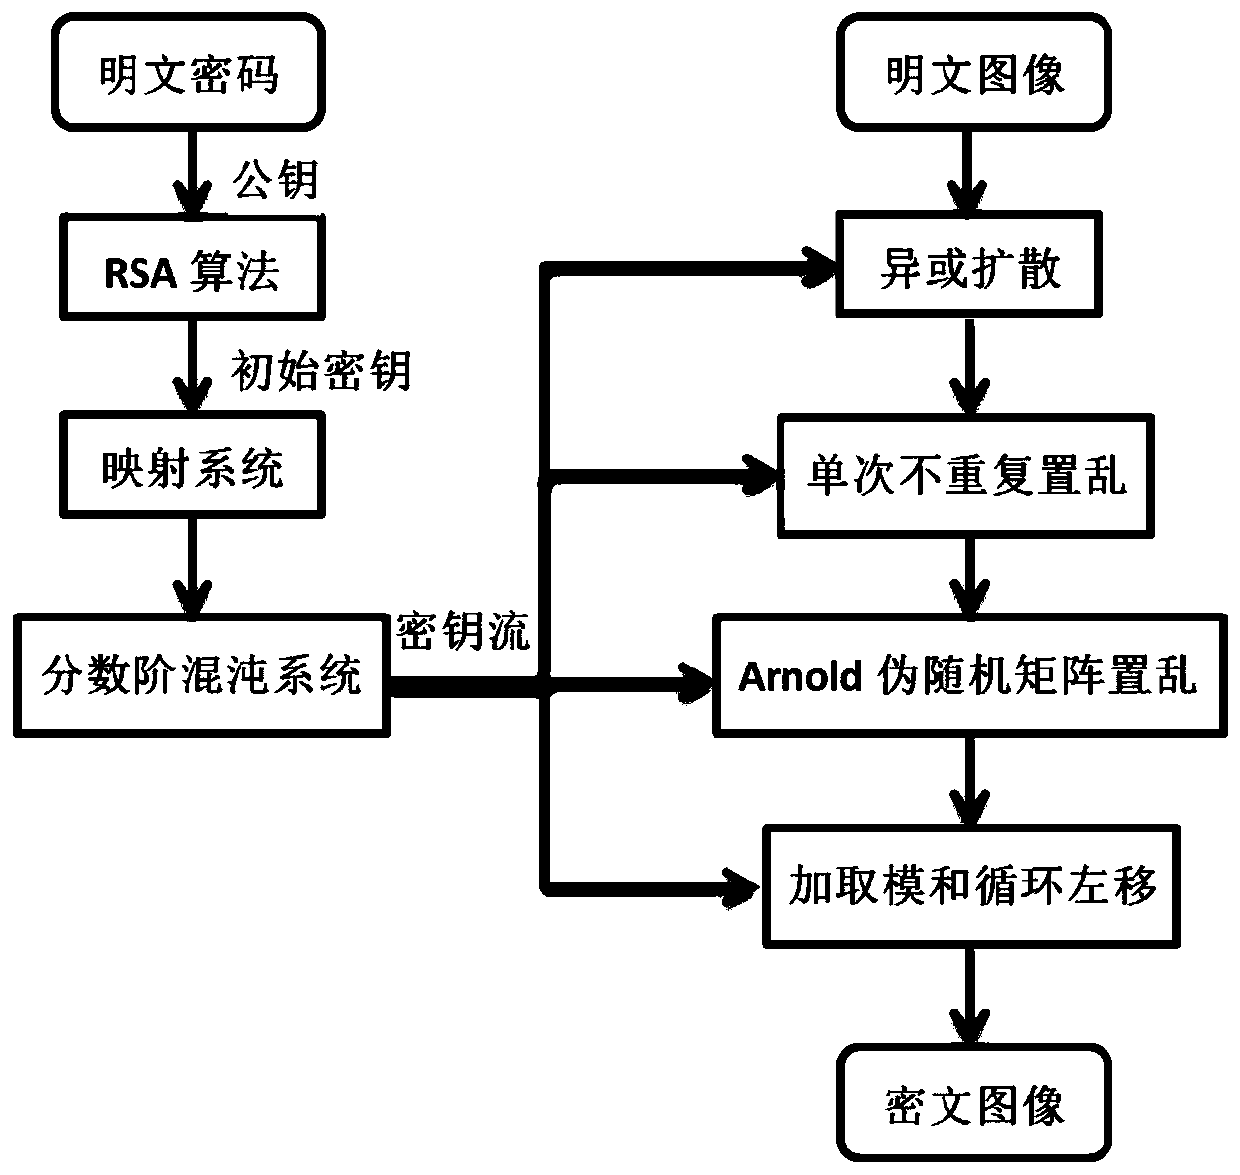 Asymmetric image encryption method based on RSA and fractional order chaotic system